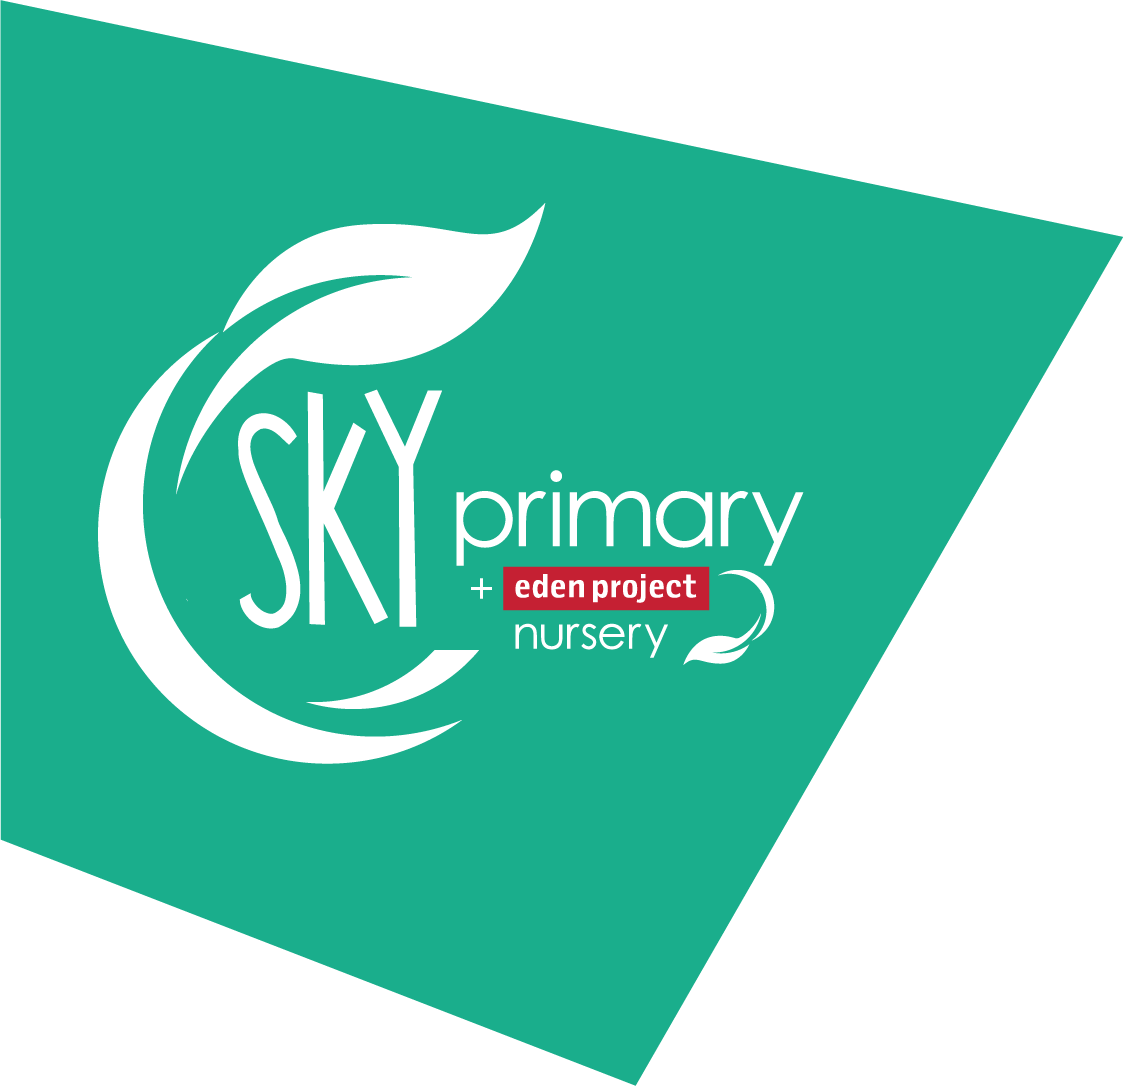 Sky Primary and Eden Project Nursery logo